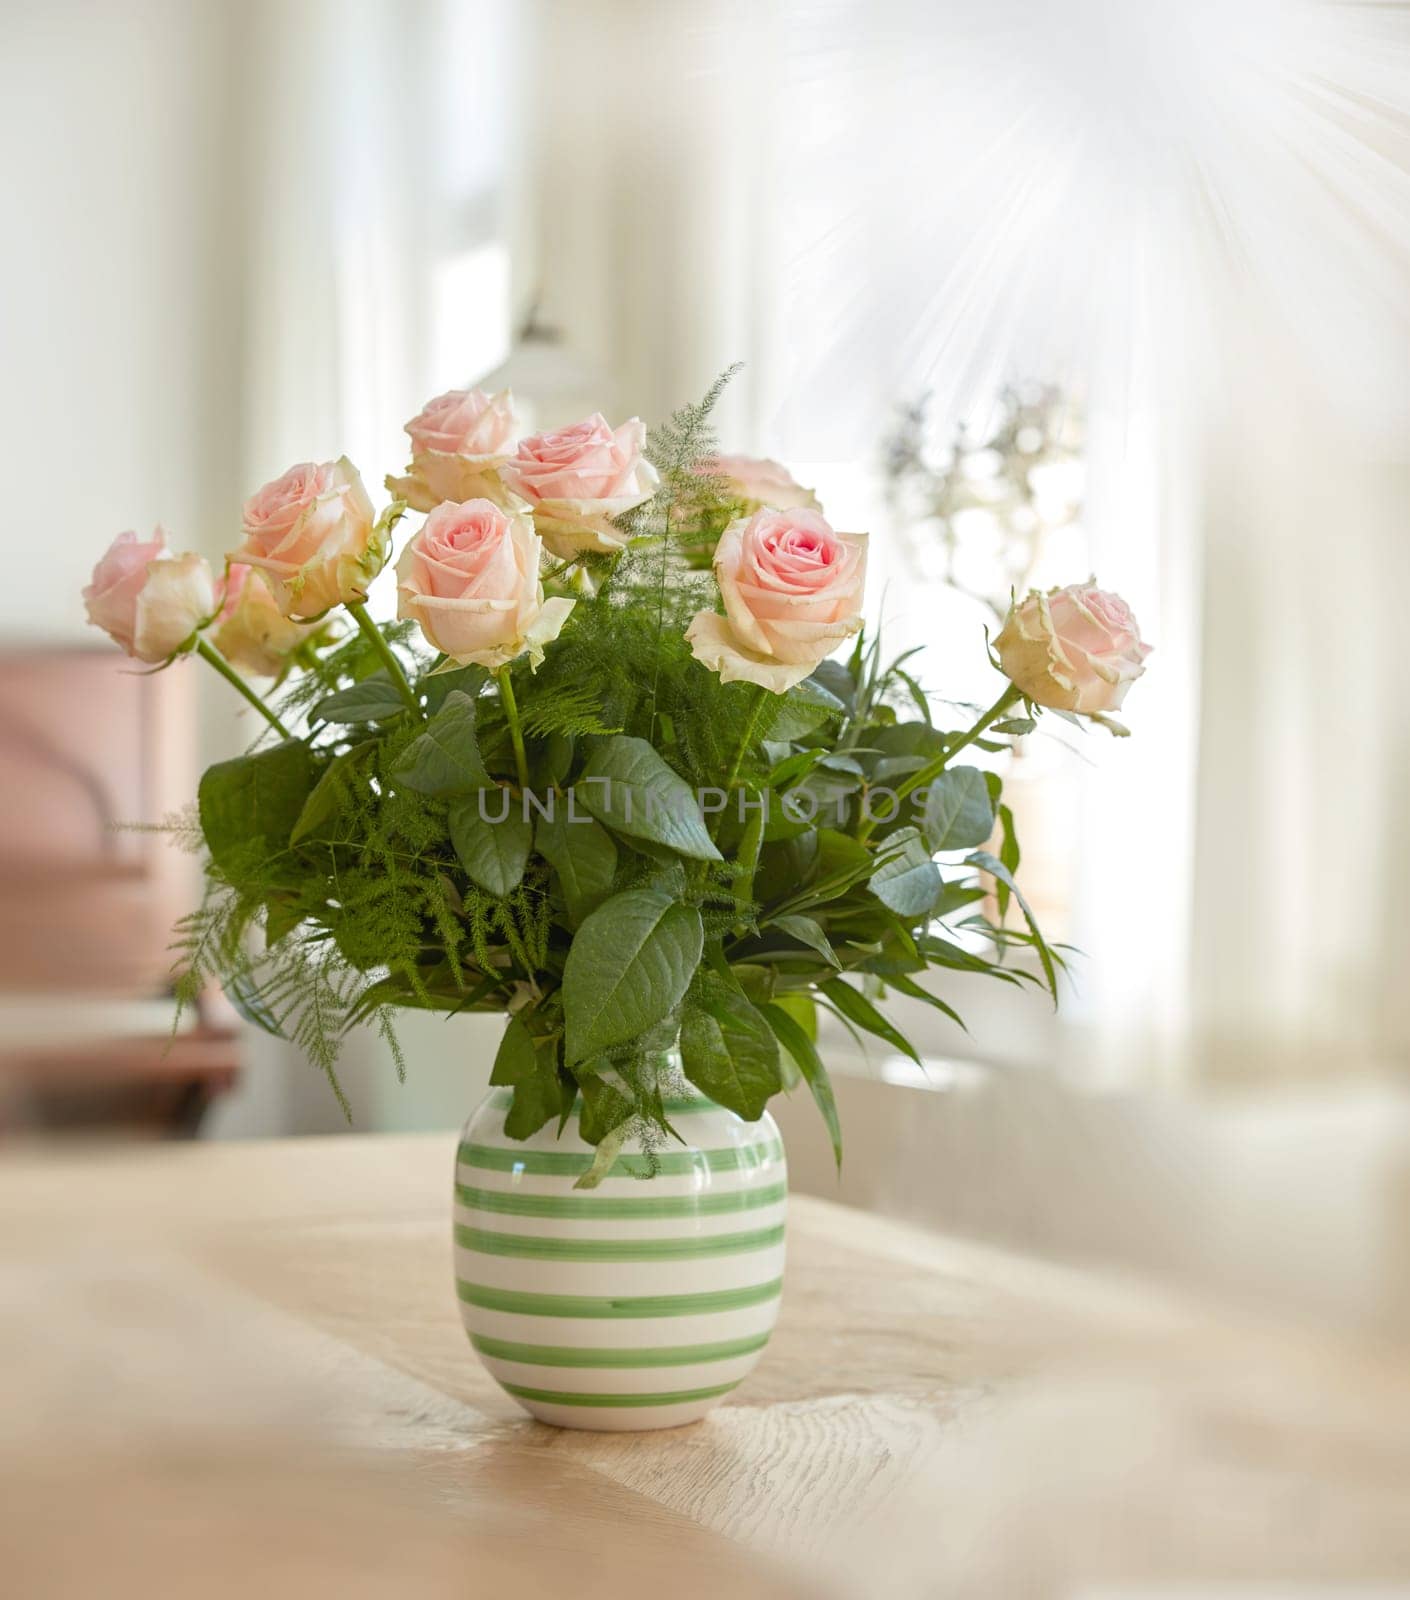 Closeup of bouquet of pink roses in a vase, nature and flowers on living room table, gift for romance or friendship. Plant, botanical and symbol of love, natural and floral arrangement at home.